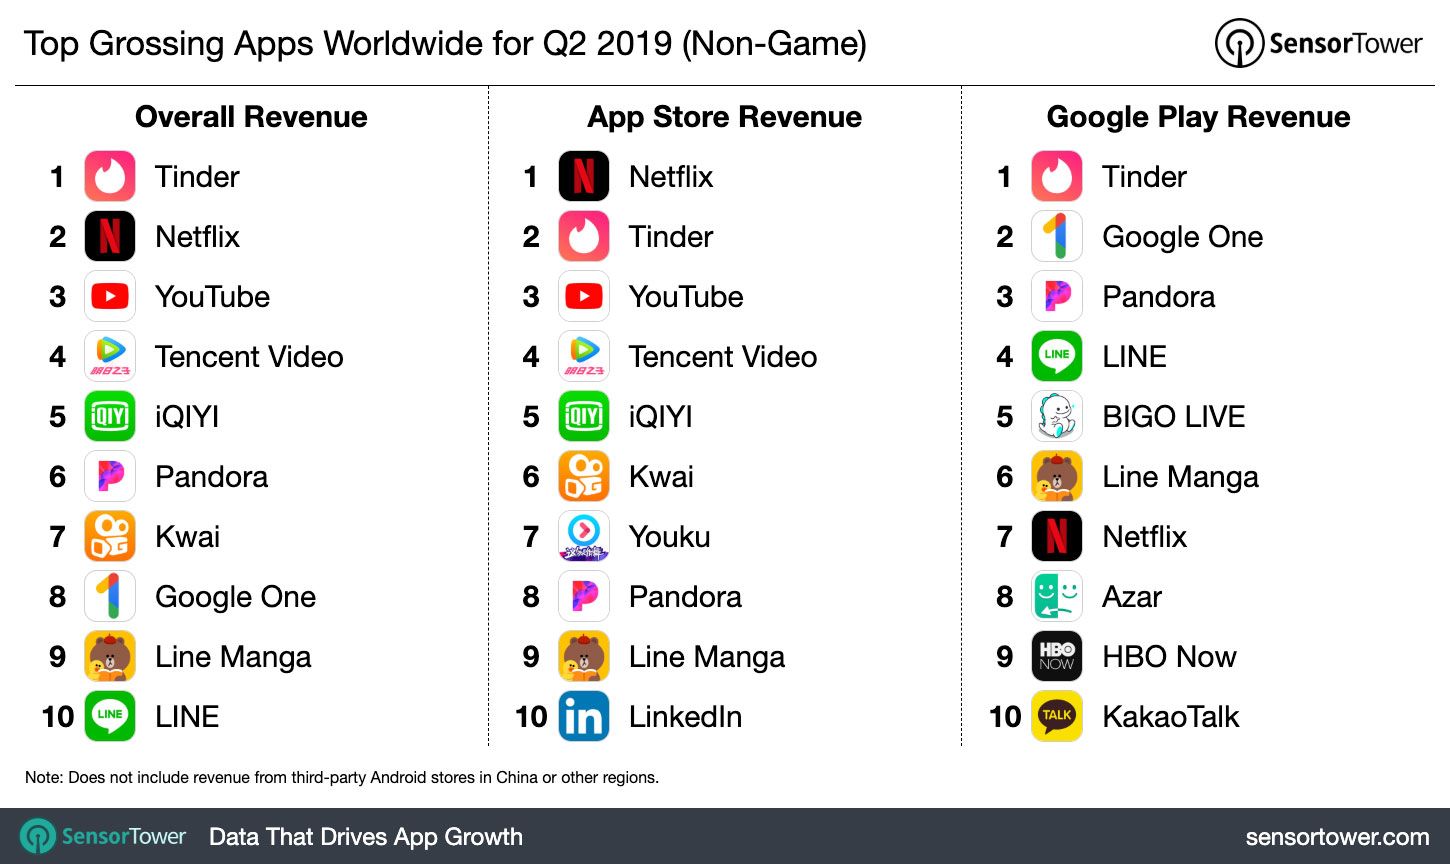 Top Grossing Apps Worldwide for Q2 2019